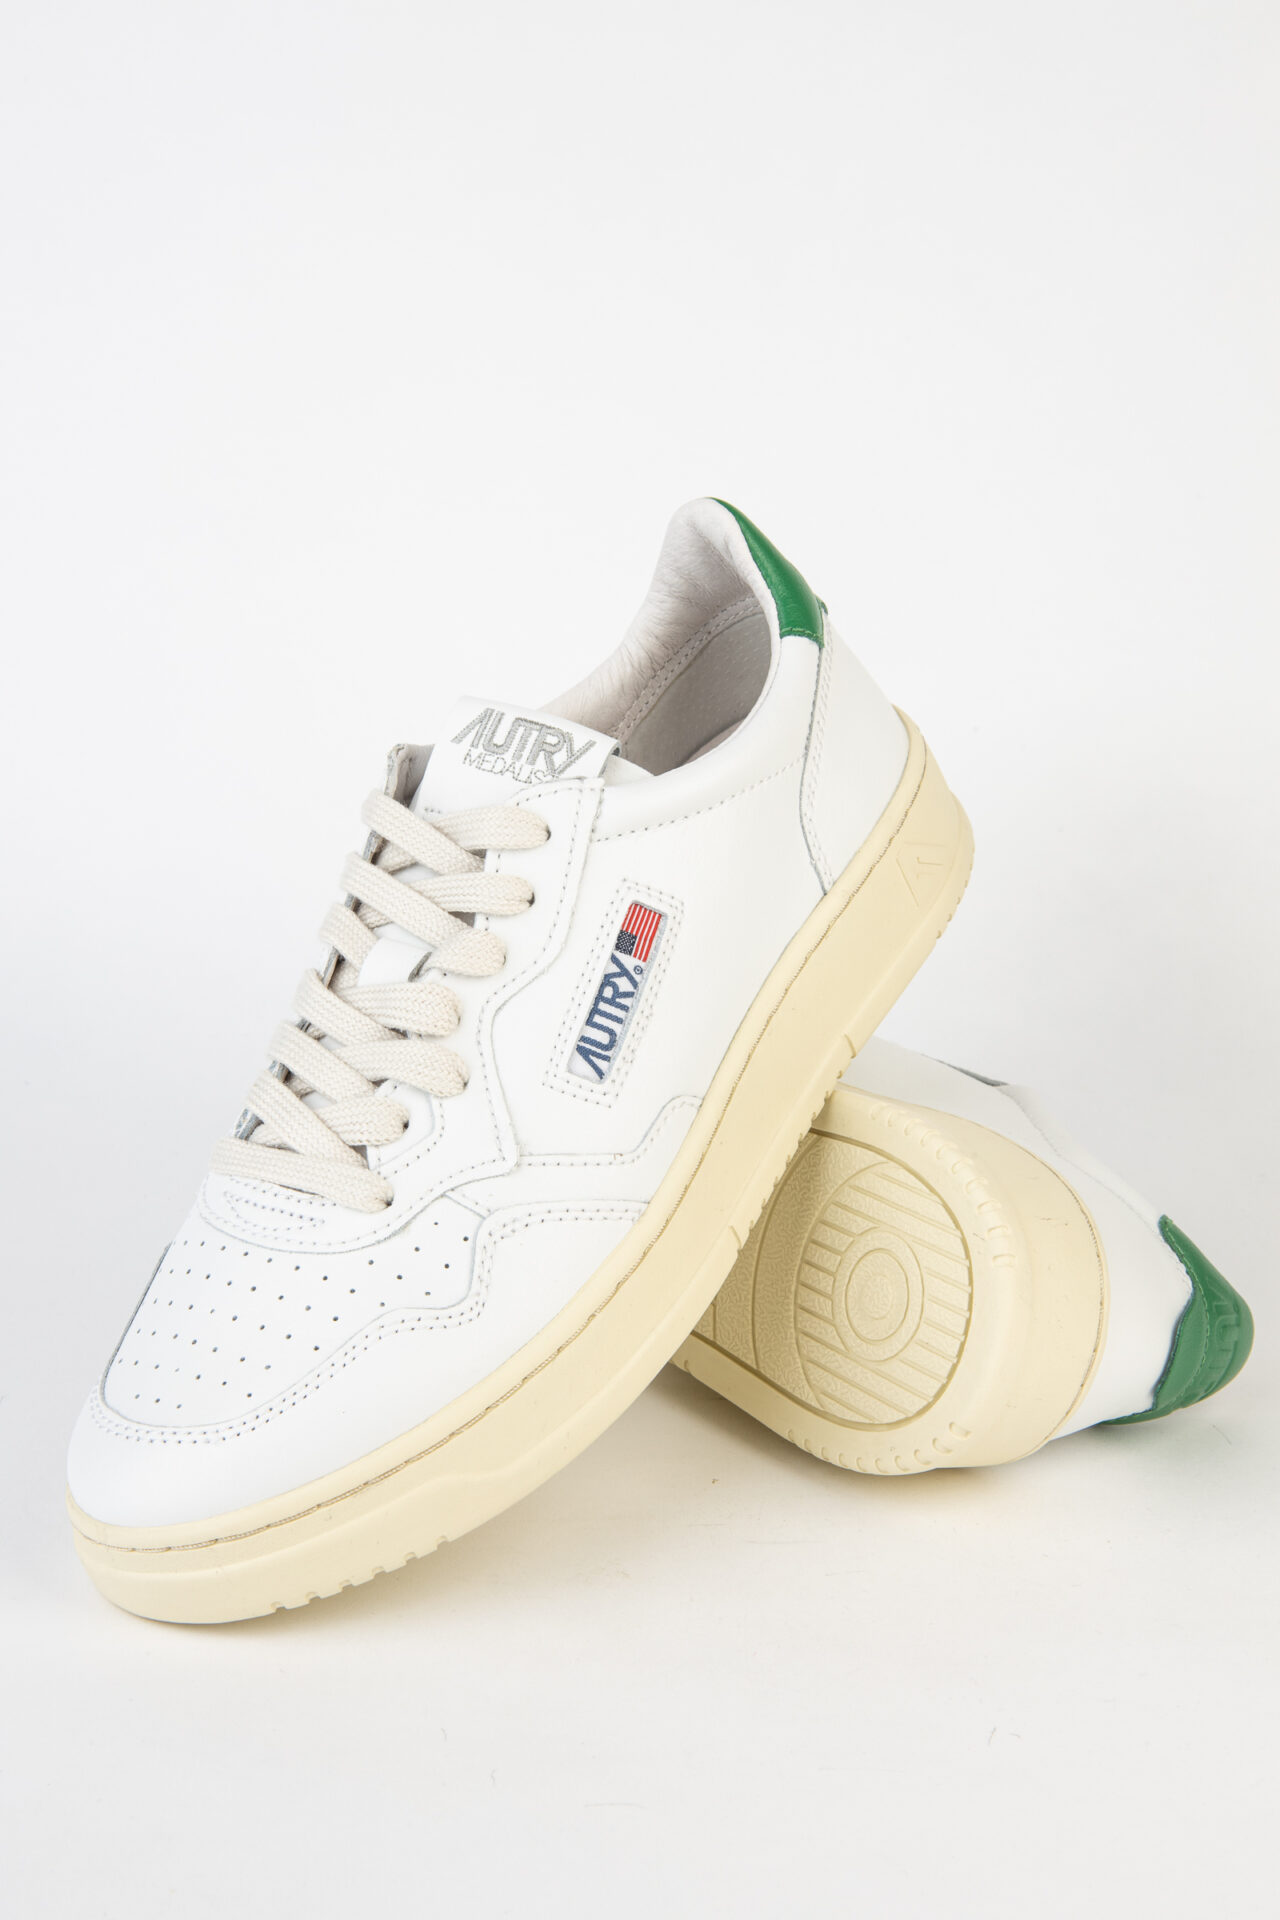 “Medalist LL20” sneaker in white/green (women’s) made of leather